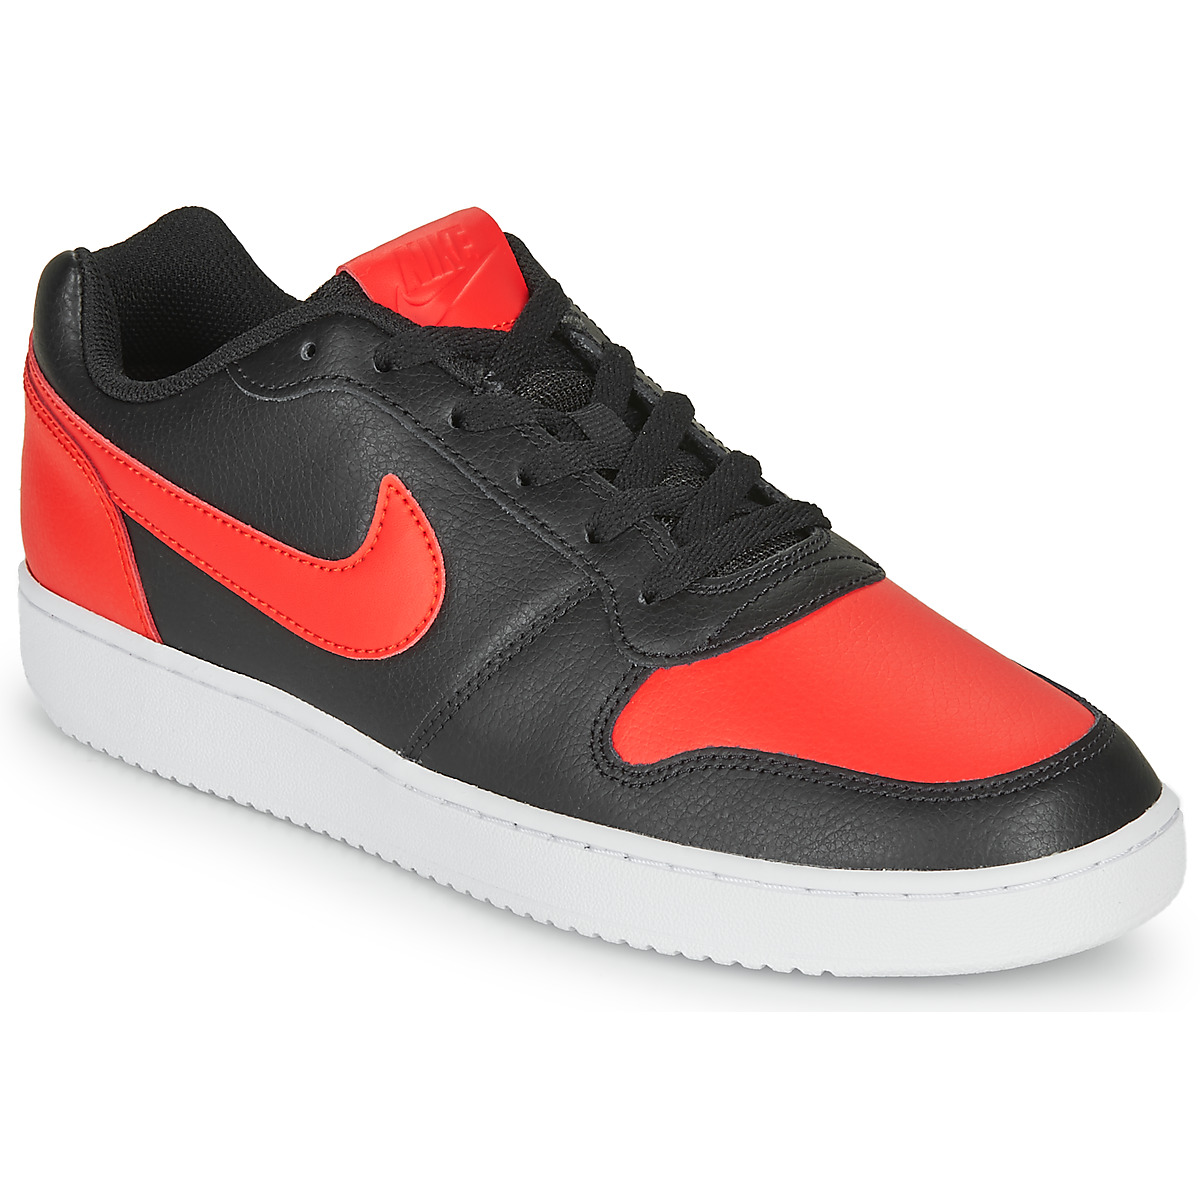 Nike EBERNON LOW men's Shoes (Trainers) in Black | AQ1775-004 | FOOTY.COM